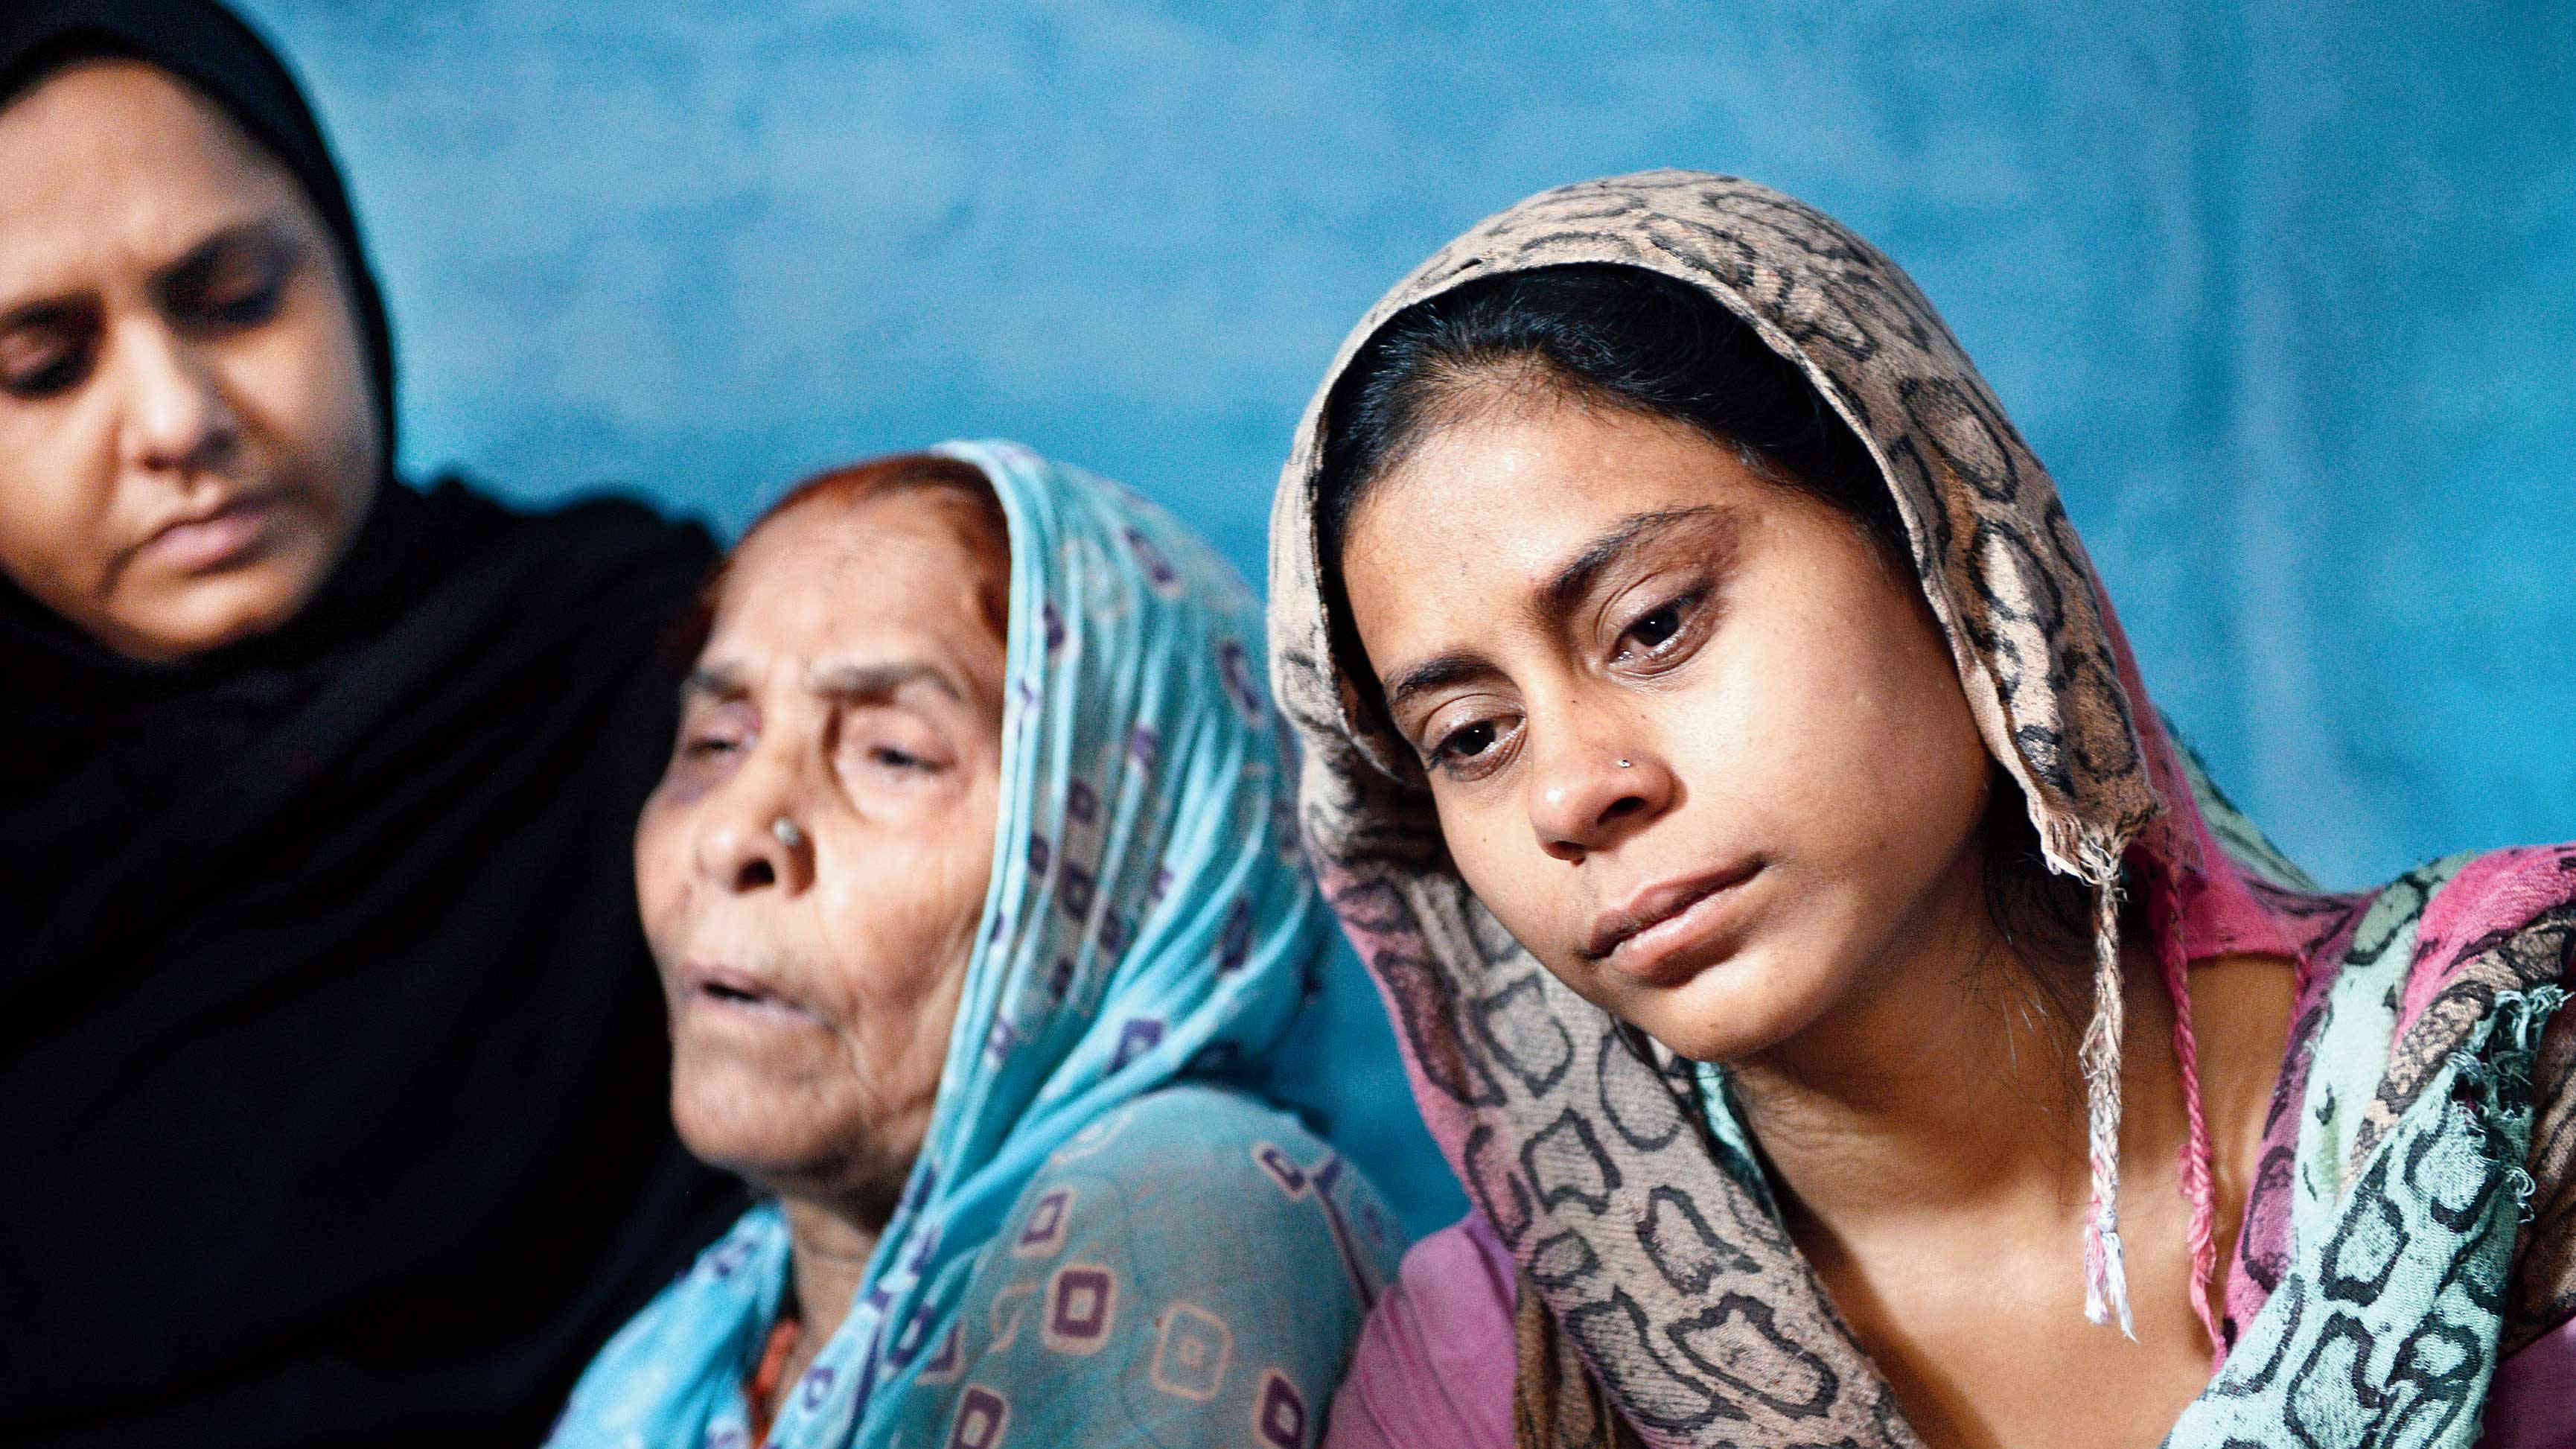 Akhlaque’s mother Asgari Begum (centre) and his daughter Shaista (right) at their Bisara home in Dadri in September 2015. Asgari Begum was also beaten up by the raiding mob when she tried to save her son.